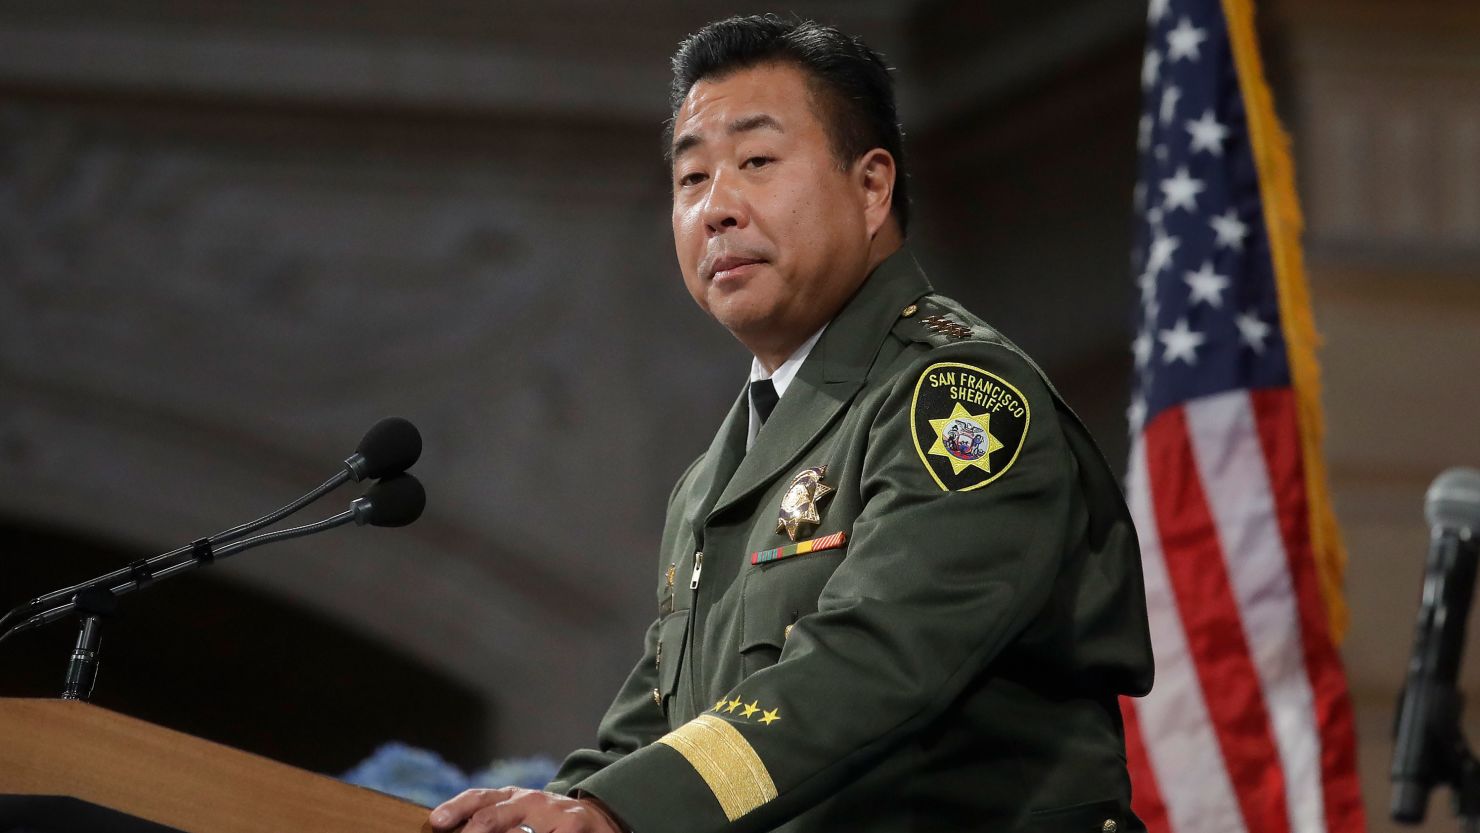 San Francisco Sheriff Paul Miyamoto speaks at his swearing-in ceremony at City Hall.